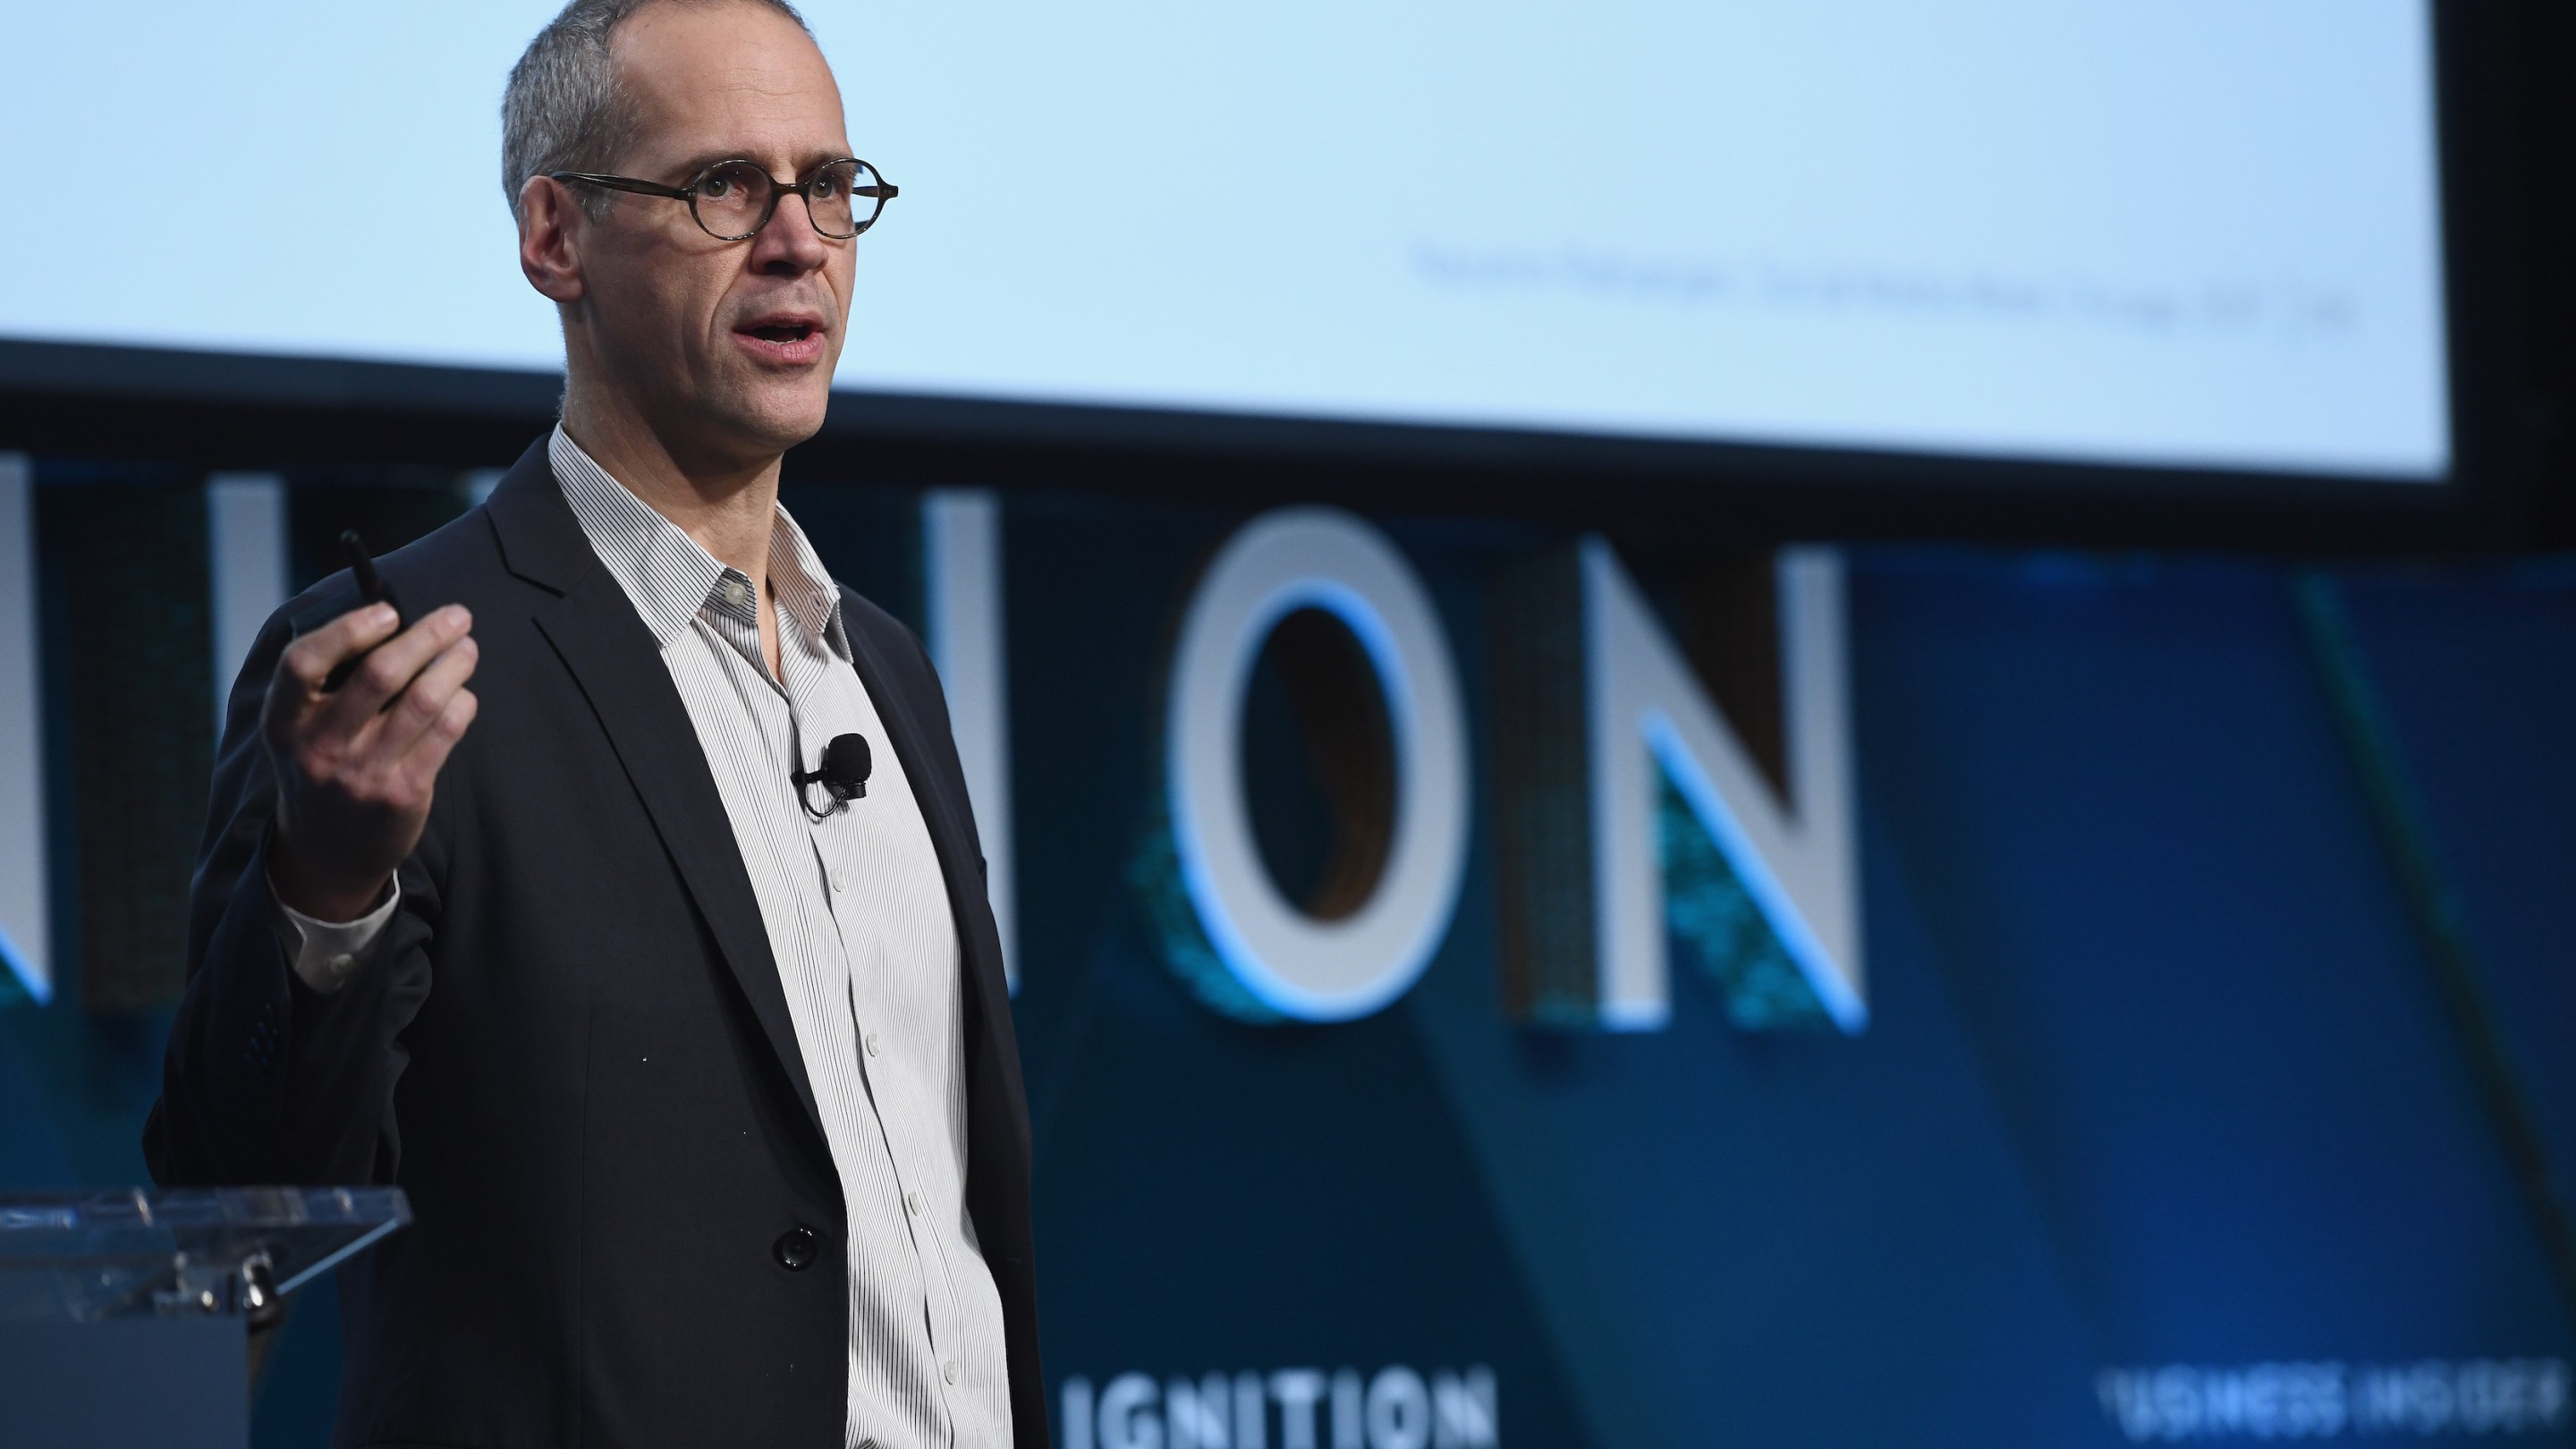 Gimlet Media co-founder Alex Blumberg speaks at the Ignition: Future of Media conference in New York City, in 2017.